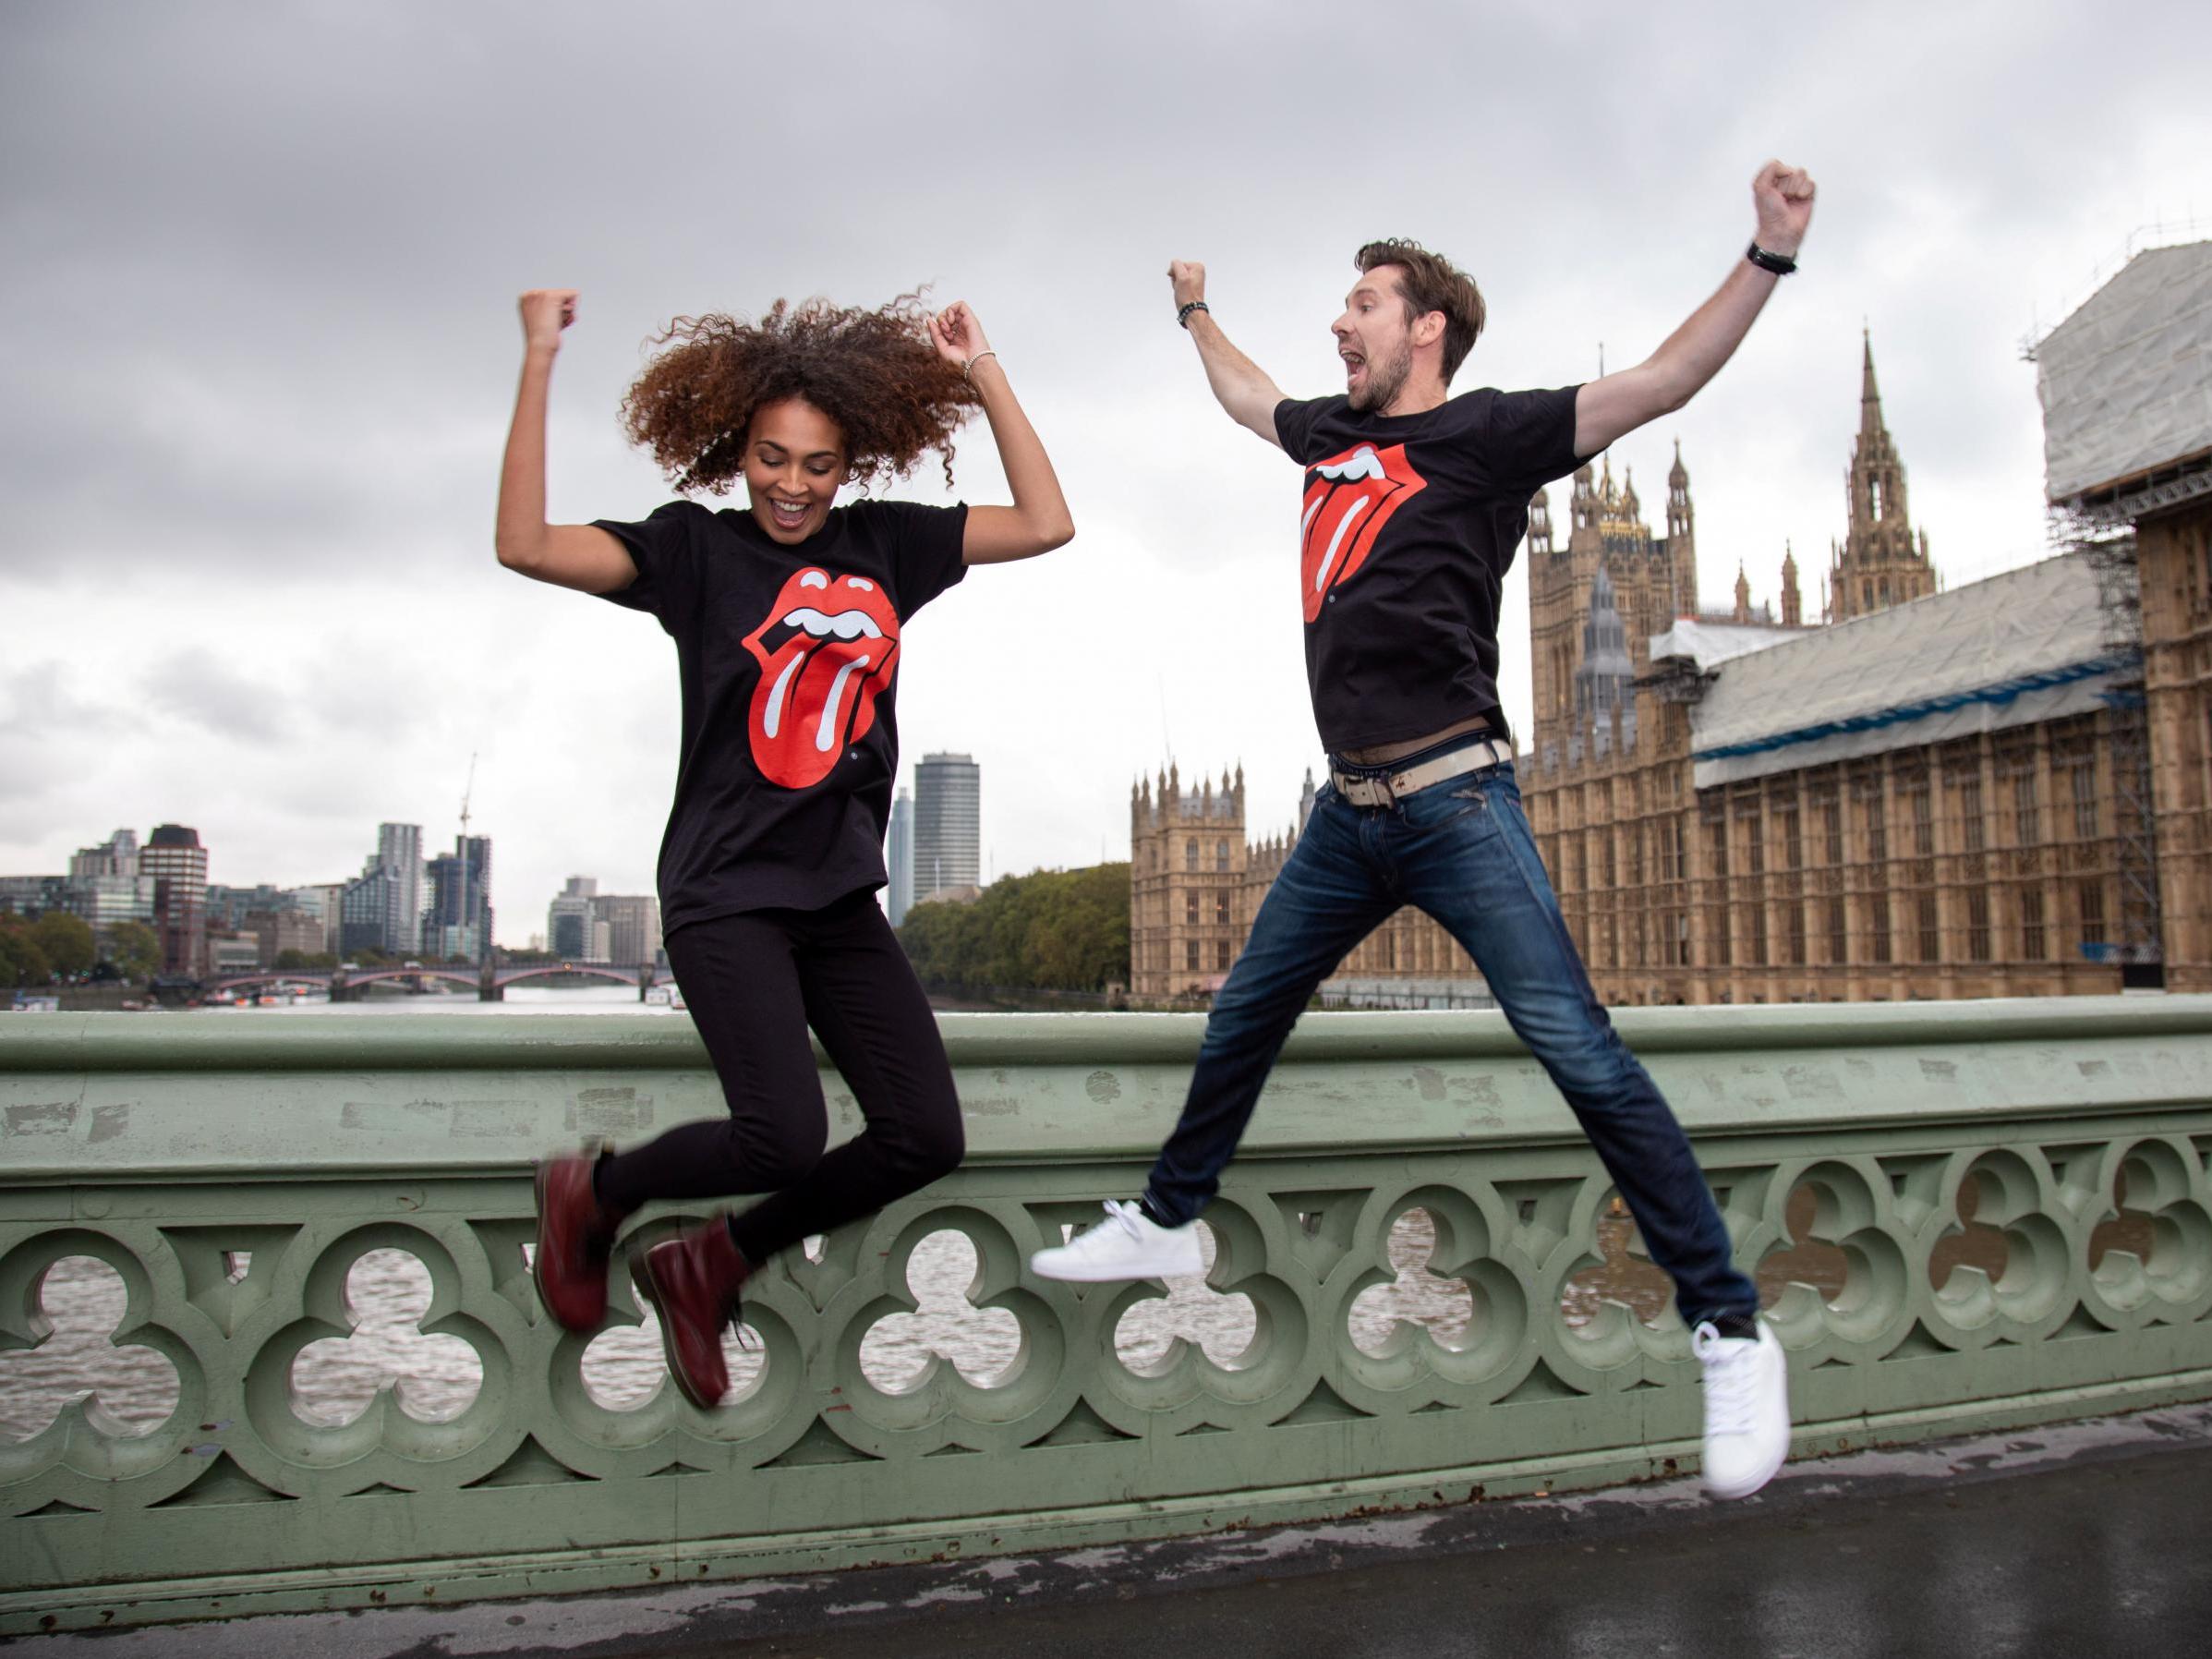 Che Guevara, Rolling Stones lips logo, Superman logo and Frankie Says Relax were among the most iconic t-shirts